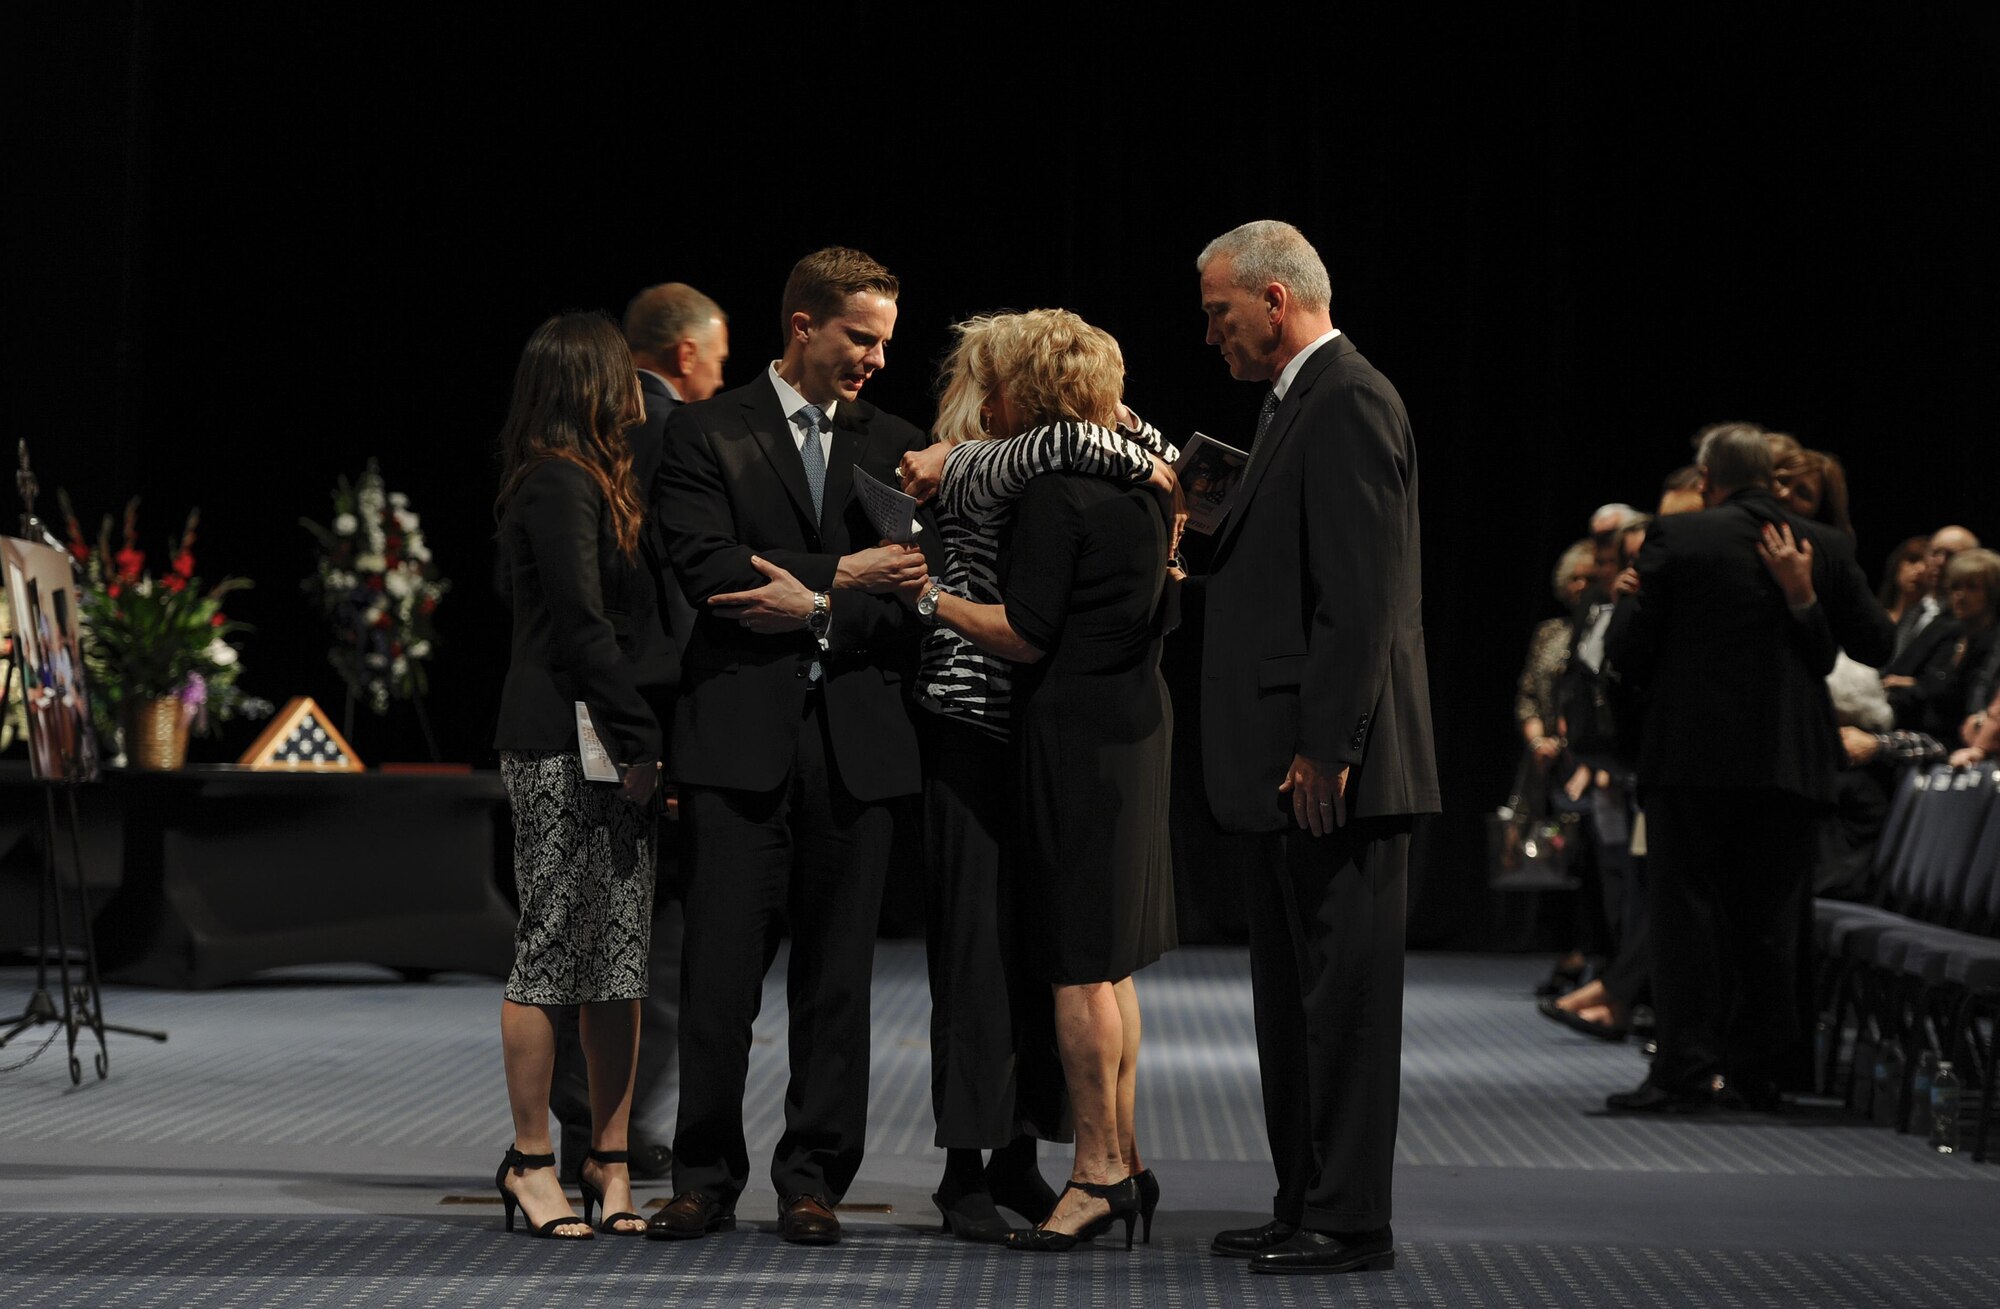 Family members of Chief Master Sgt. of the Air Force #9 James C. Binnicker mourn during his celebration of life ceremony at the Emerald Convention Center, Fort Walton Beach, Fla., March 28, 2015. During his tenure as the ninth chief master sergeant of the Air Force, Binnicker led the transformation from the Airman Performance Report to the Enlisted Performance Report, and developed the performance feedback system. He also worked to have master sergeants admitted to the Air Force Senior NCO Academy, and to increase the opportunities for minorities and women throughout the Air Force. (U.S. Air Force photo/Senior Airman Christopher Callaway)